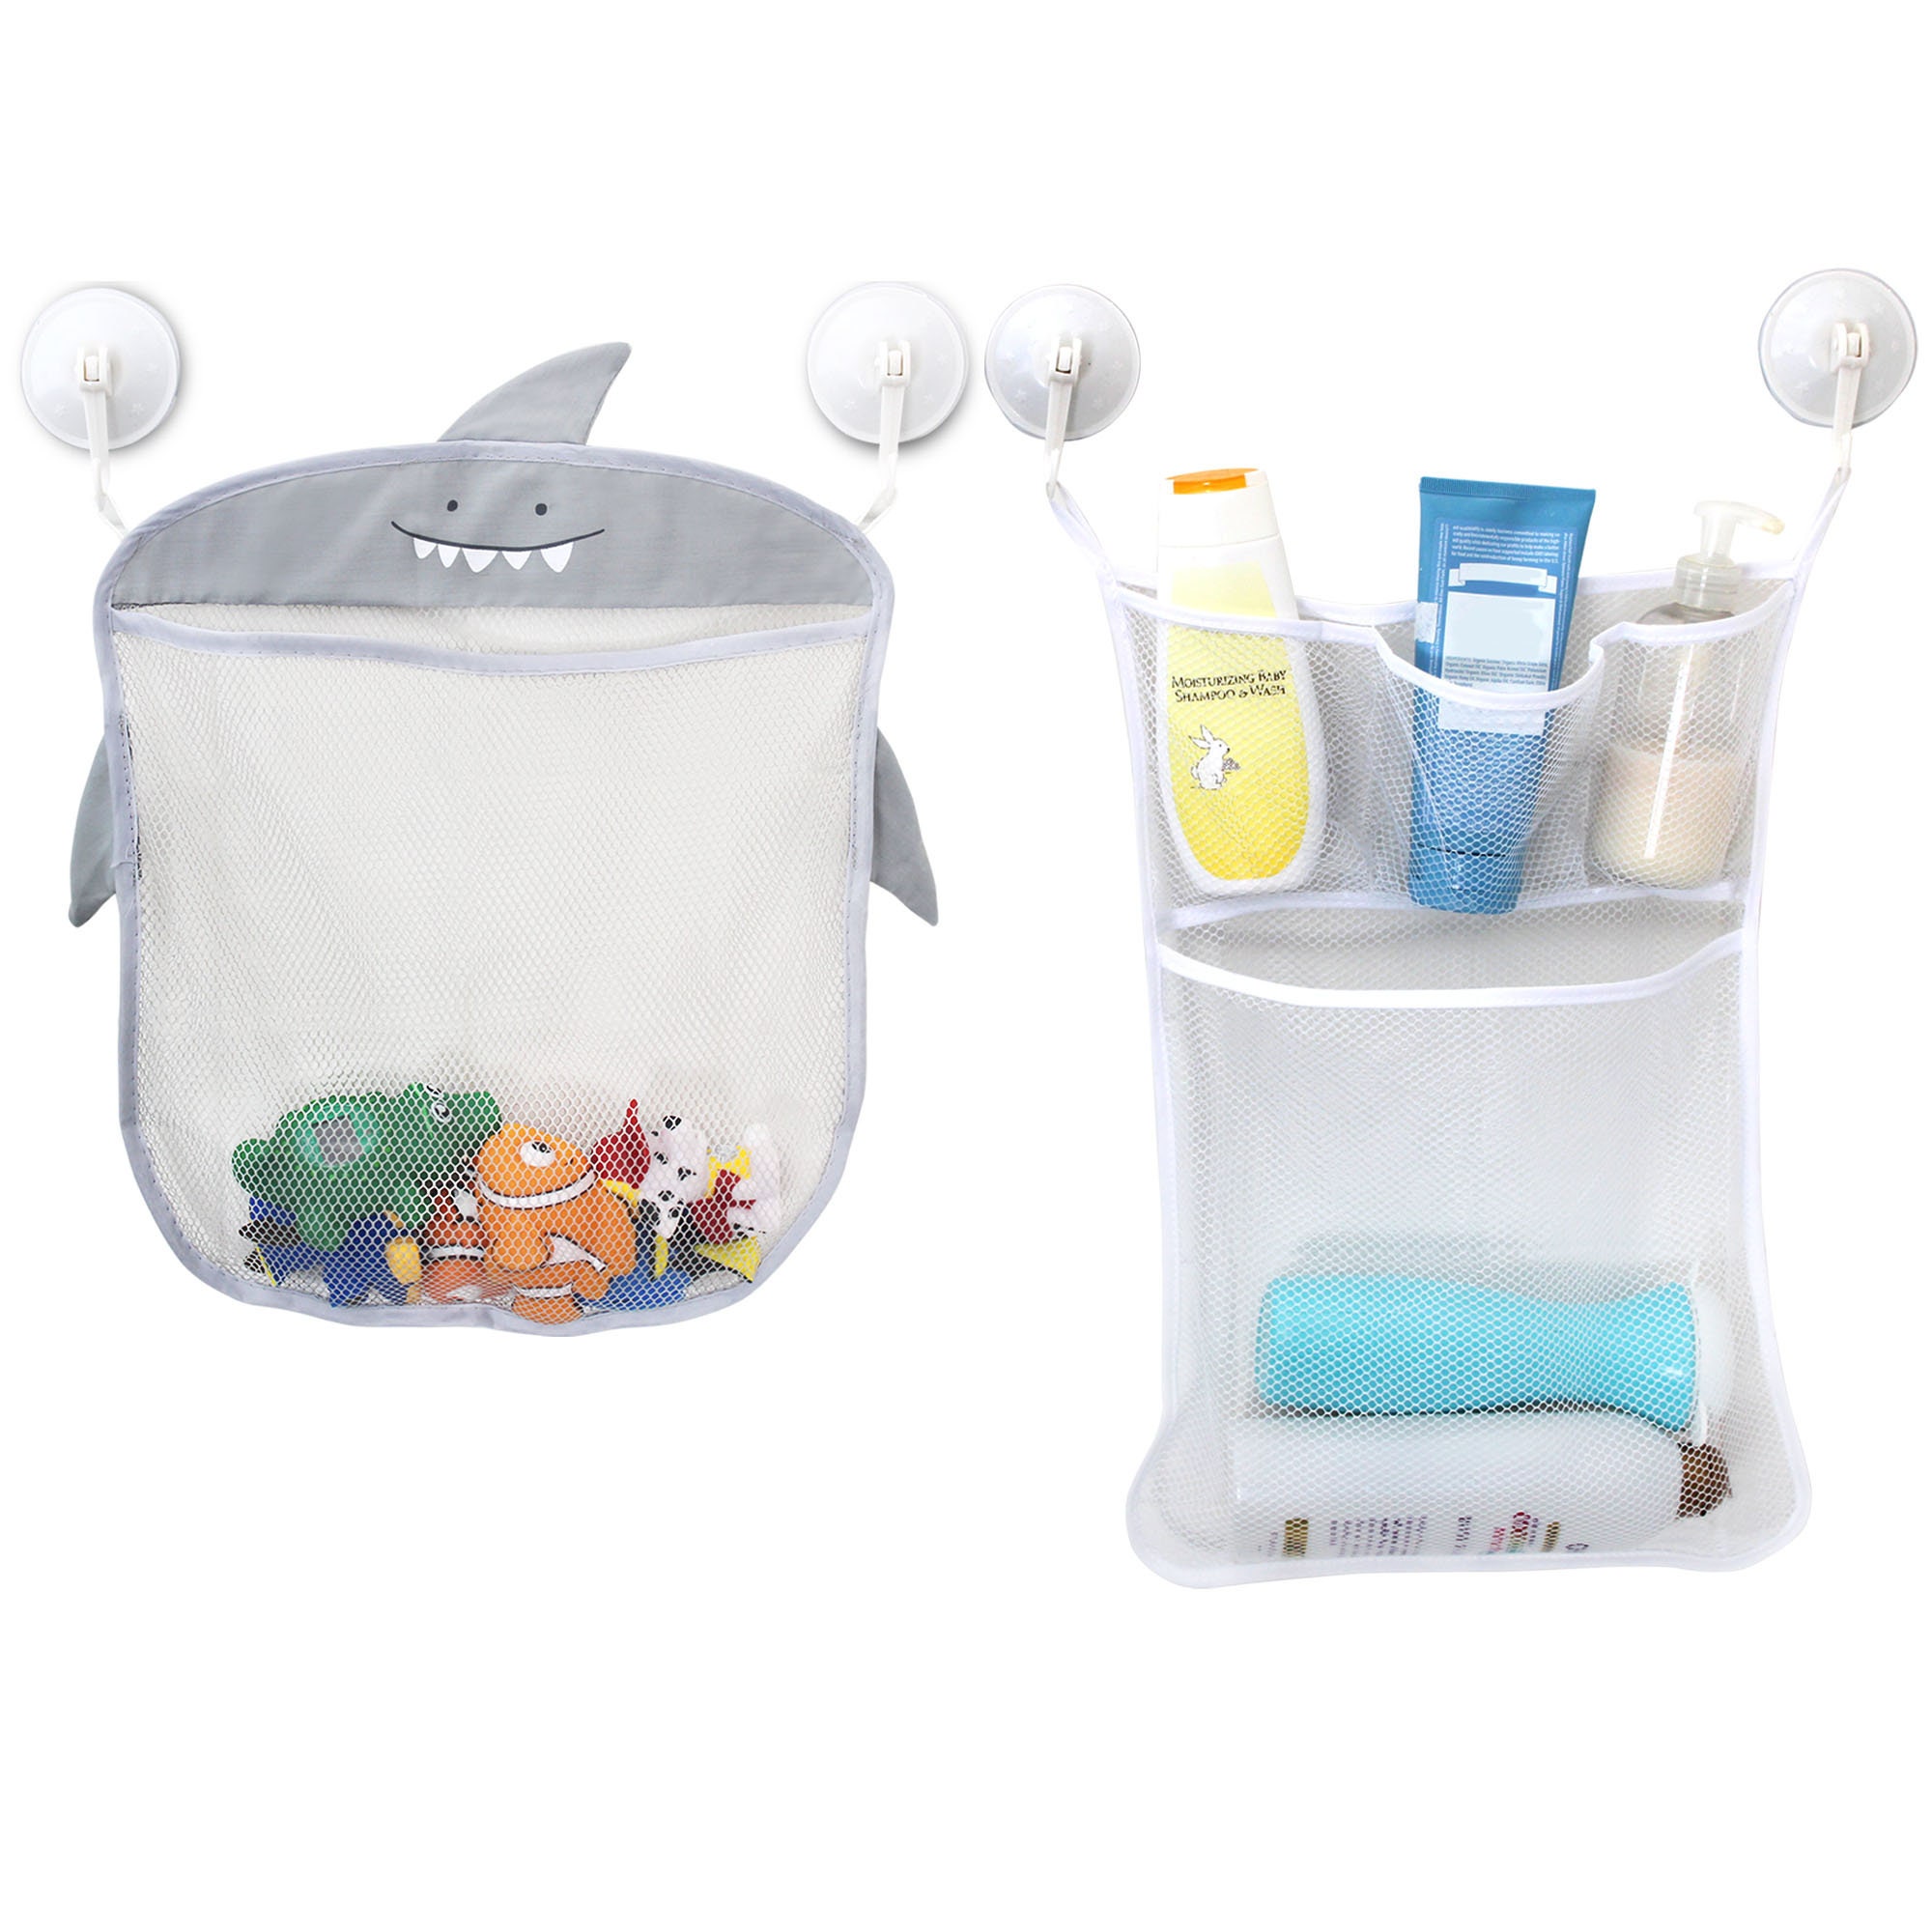 Wholesale bath toy organizer to Save Space and Make Storage Easier